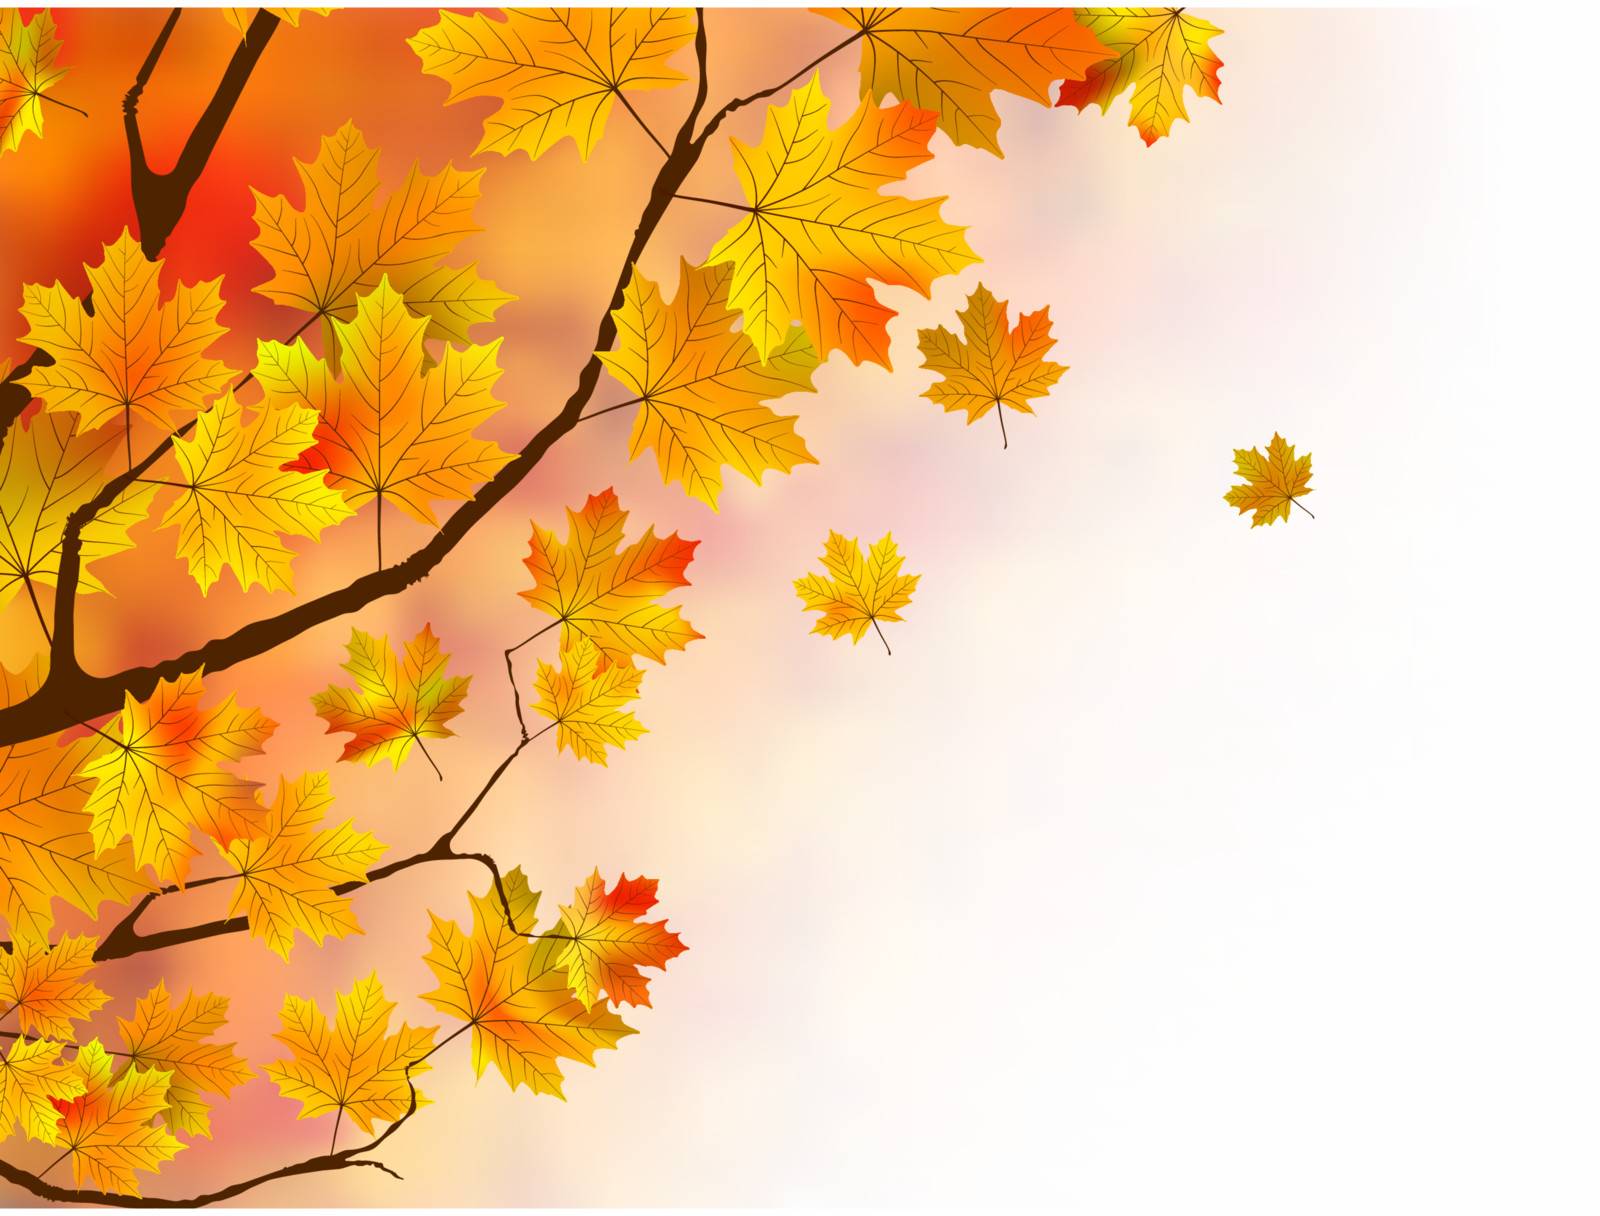 Warm colors of Autumn. EPS 8 vector file included